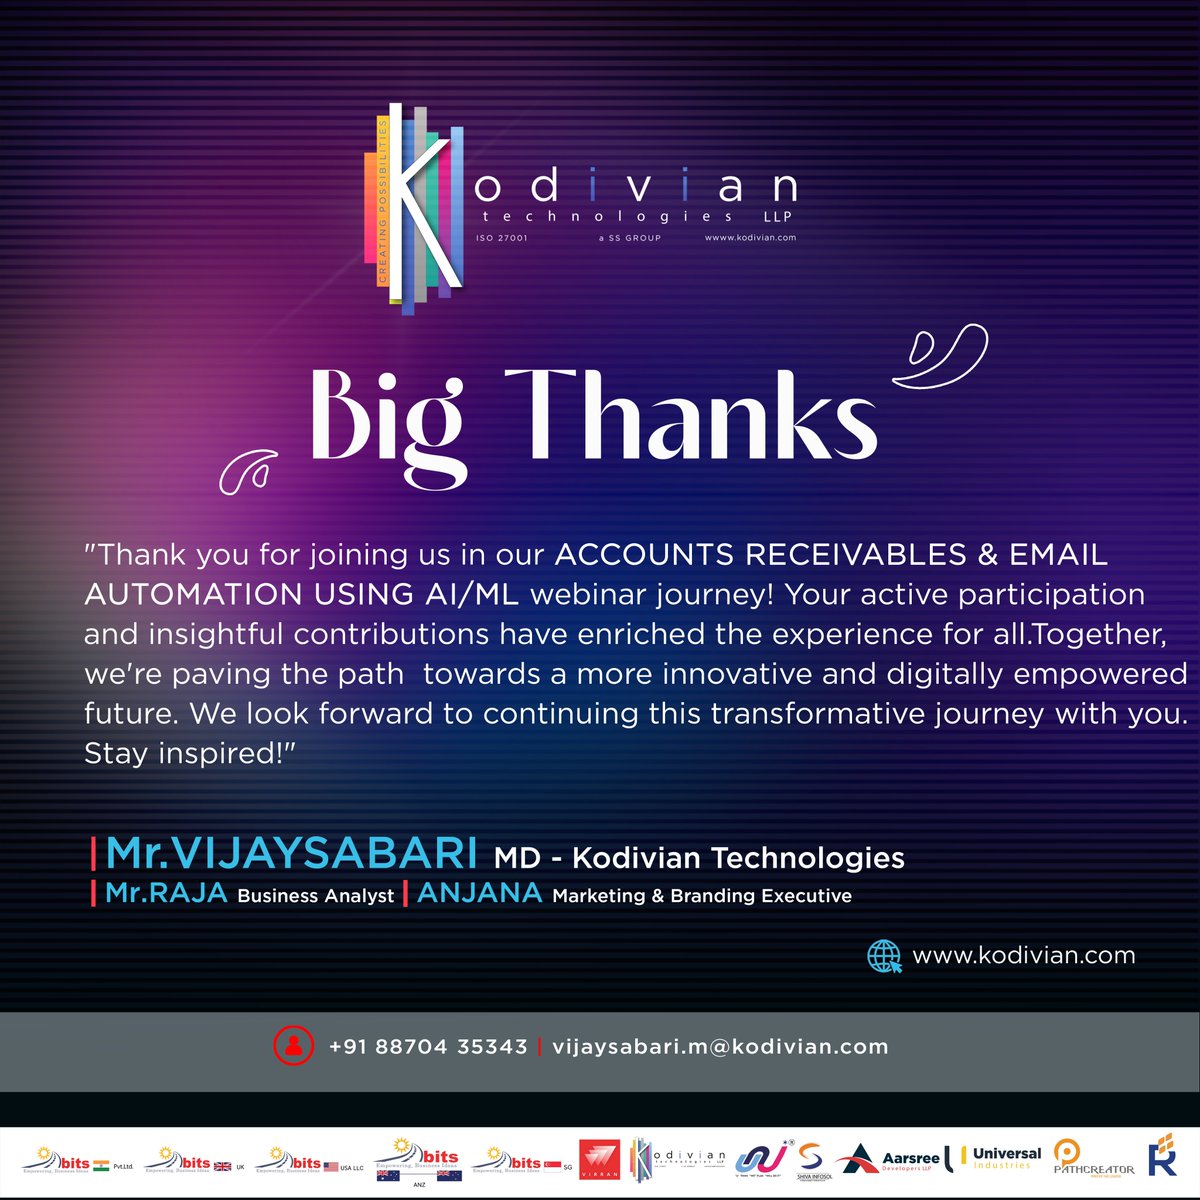 Big Thanks for joining us in our Accounts Receivables & Email Automation Using AI/ML webinar journey!

#kodivian #ssgroupofcompanies #ssgroup #ai #ml #webinar #accountsreceivables #emailautomation #webinarjourney